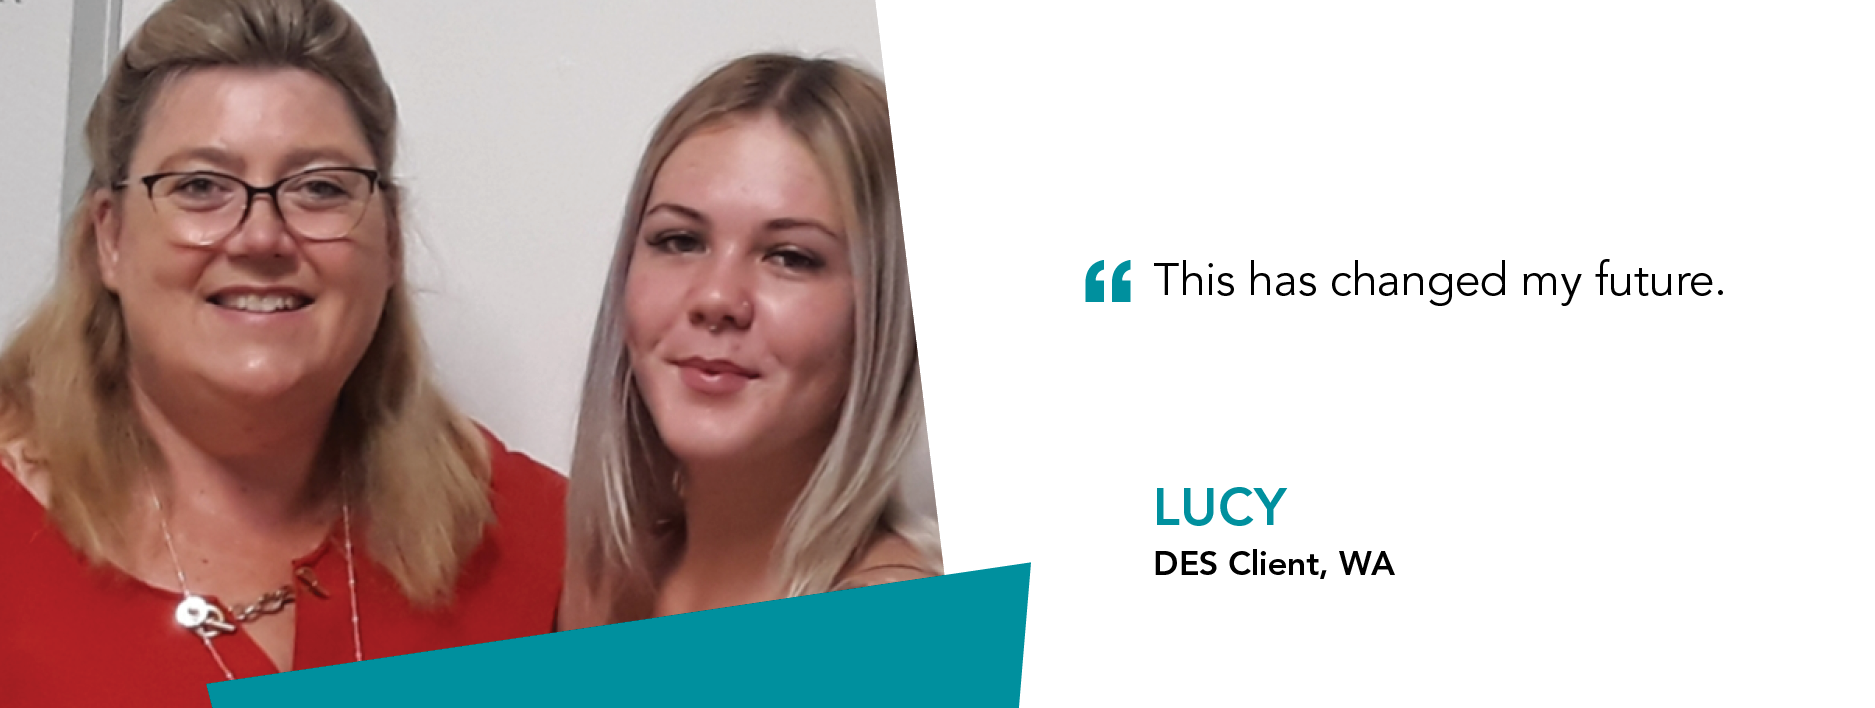 "This has changed my future." Lucy, DES Client, WA